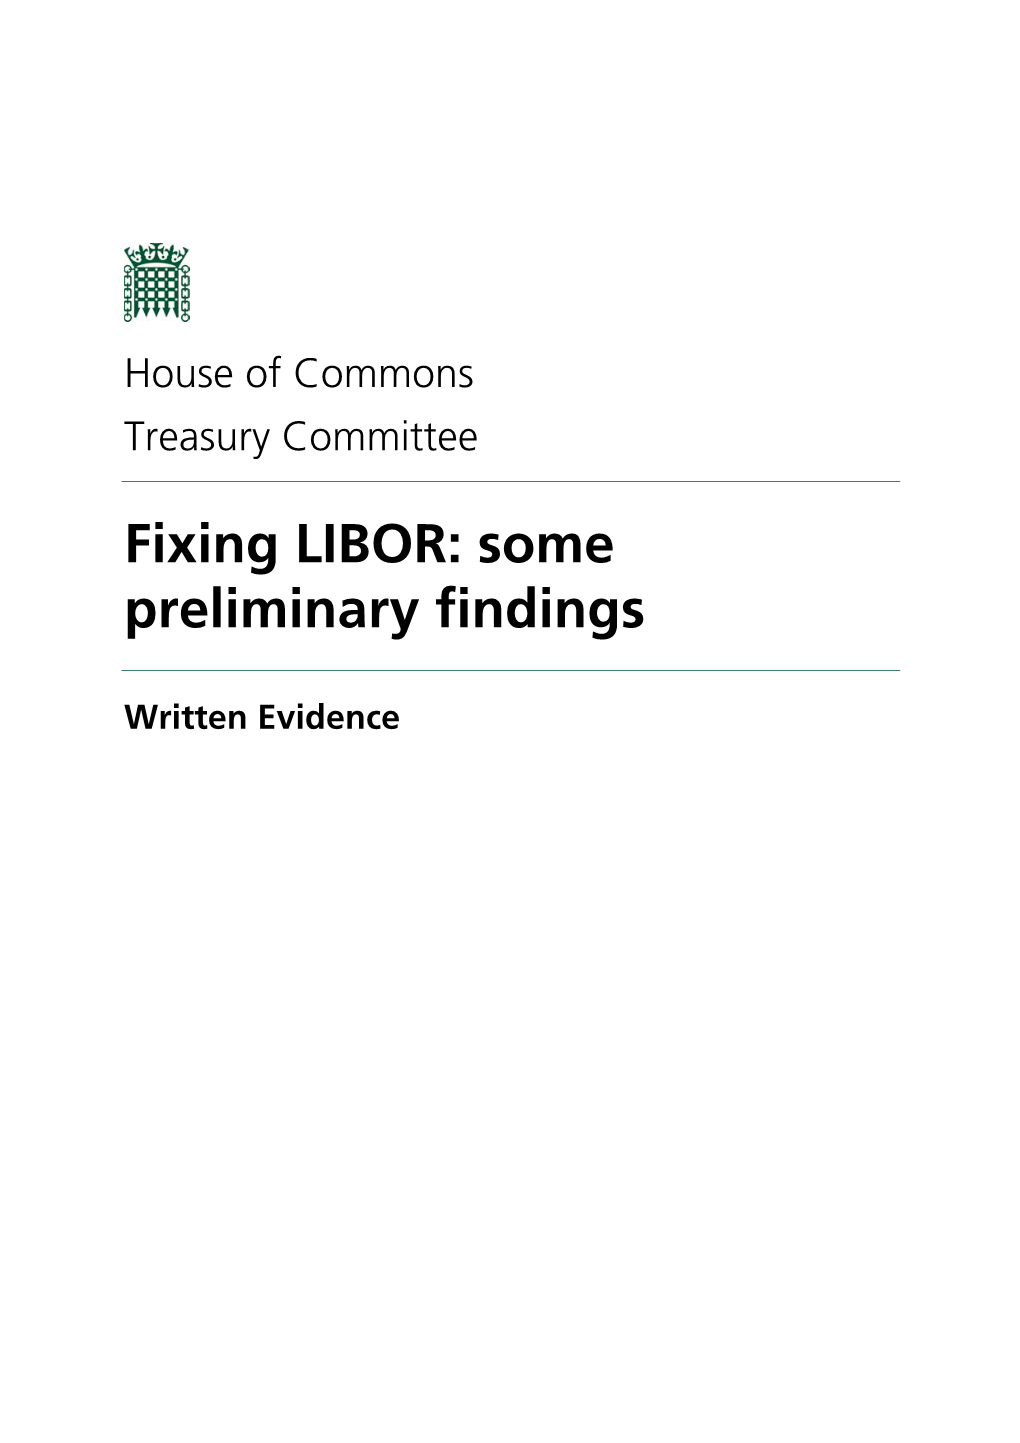 Fixing LIBOR: Some Preliminary Findings